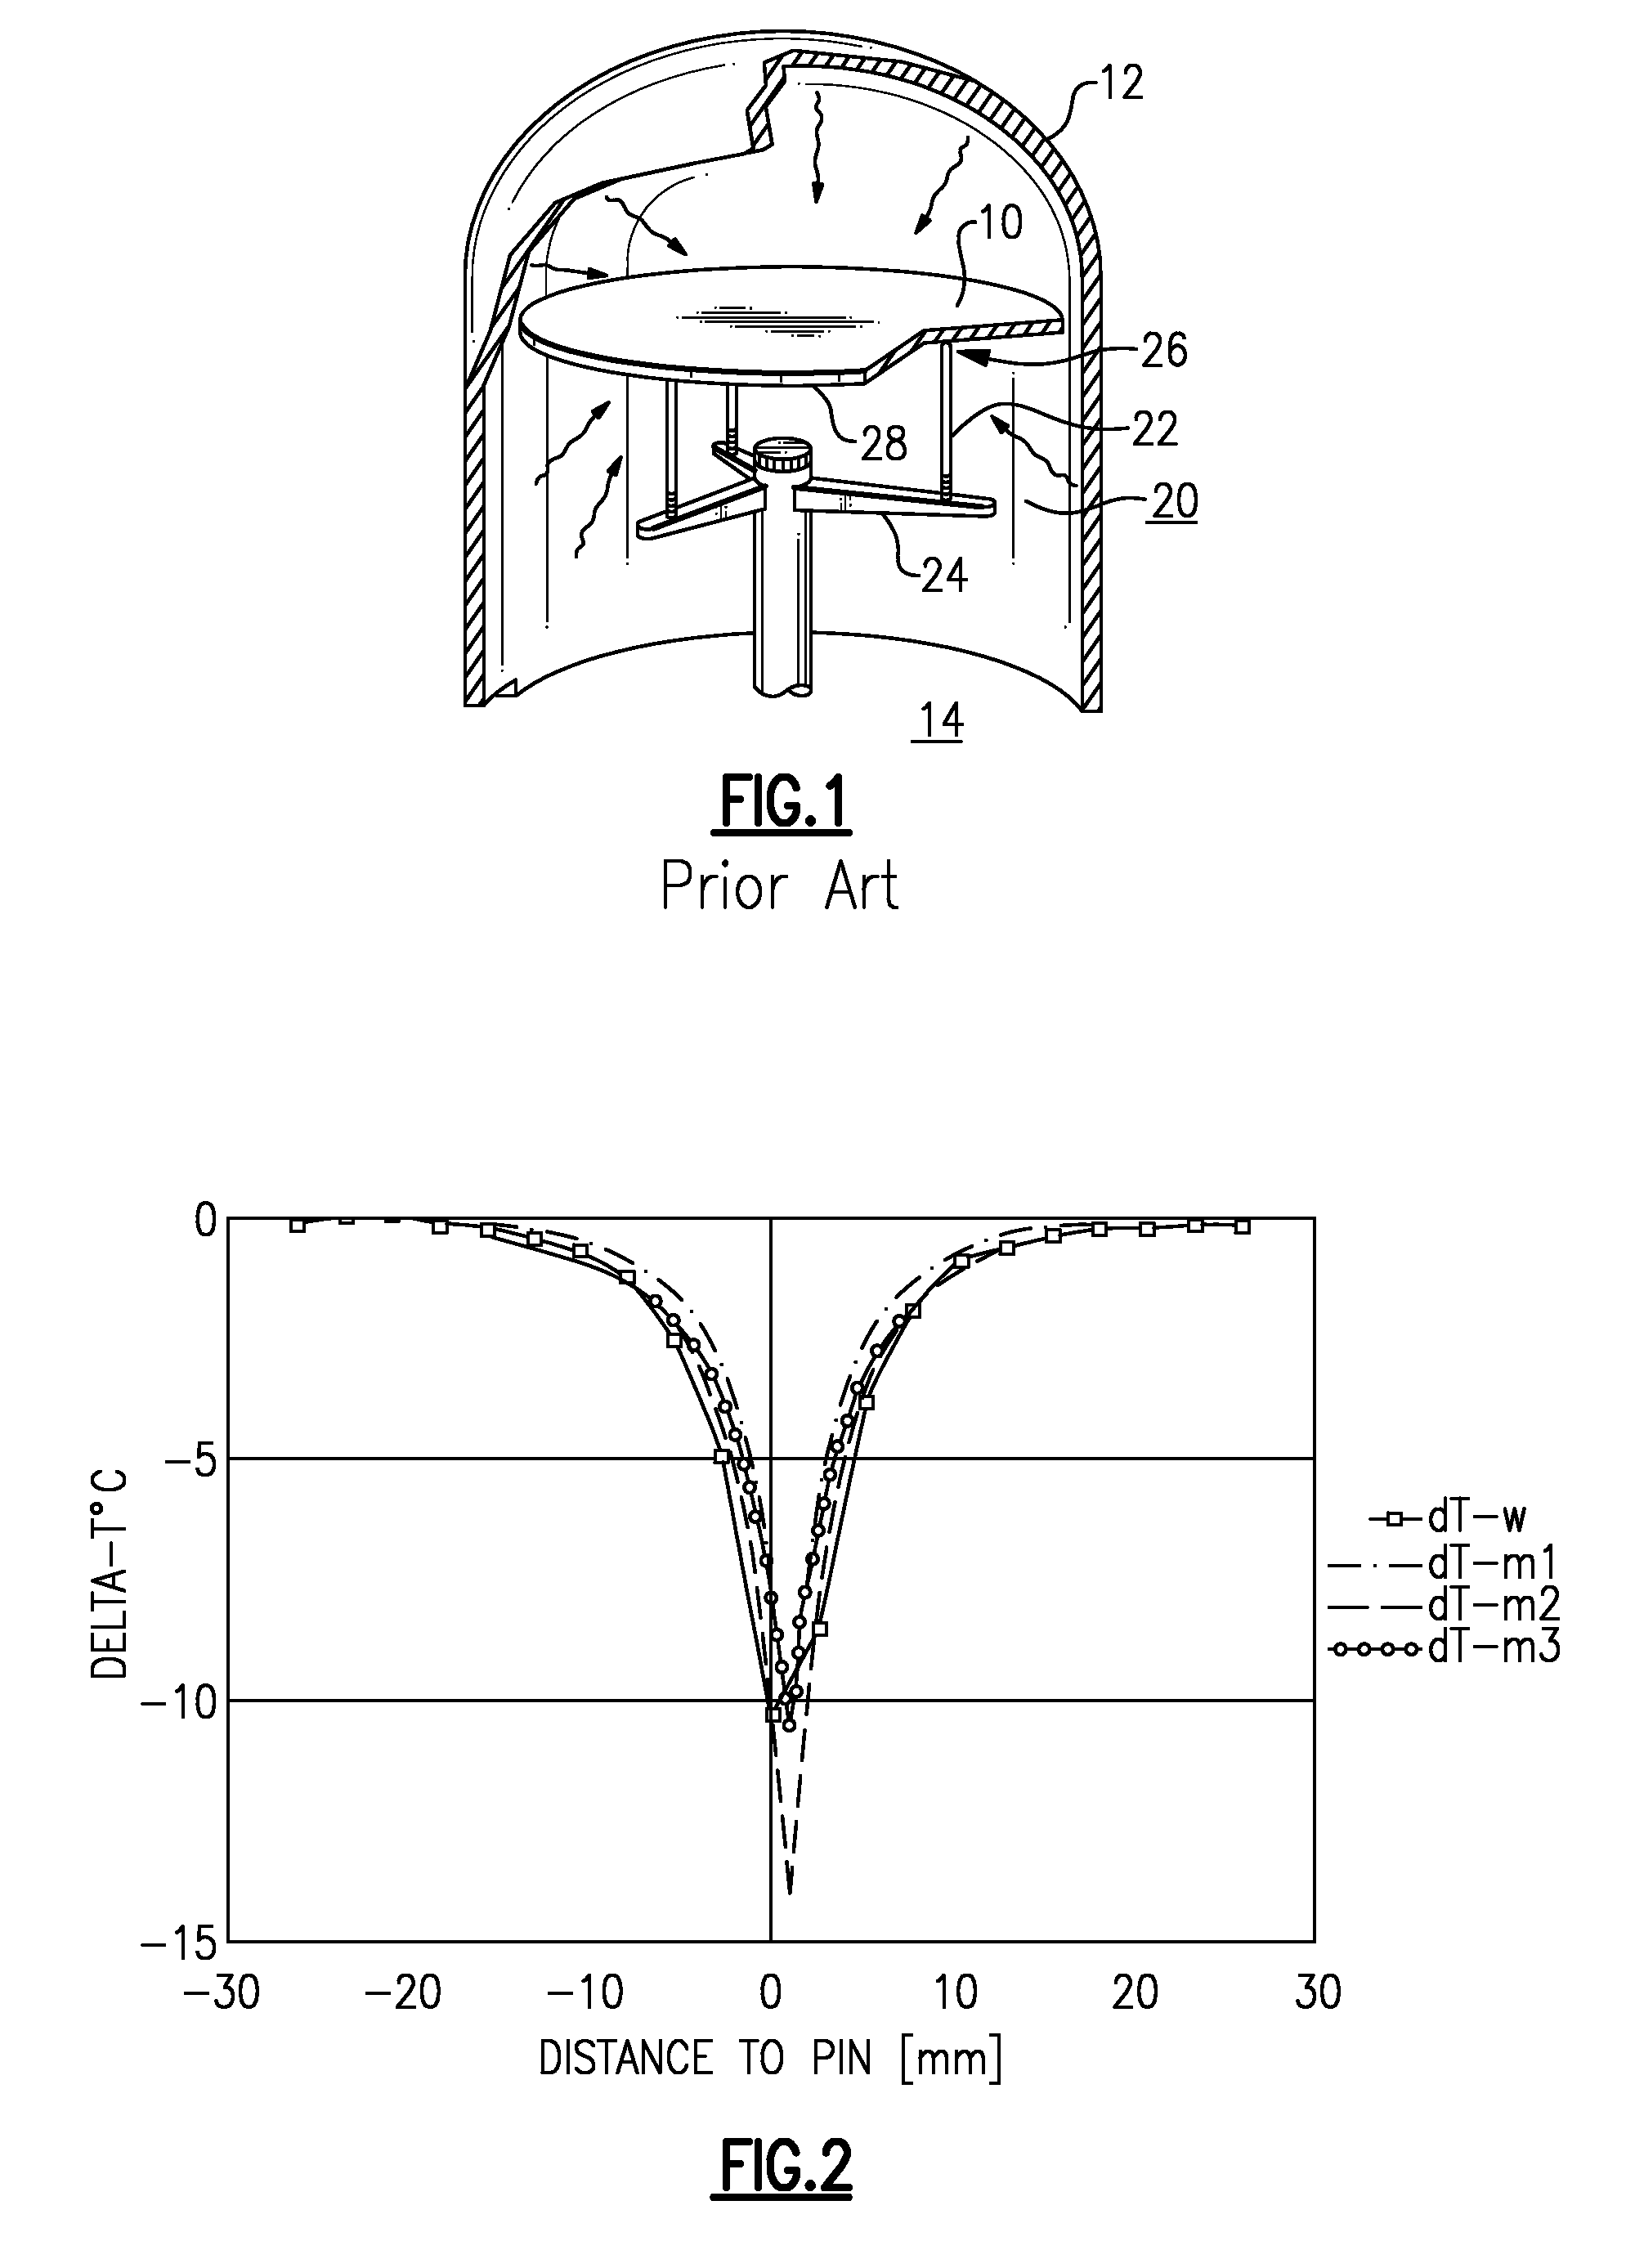 Method and structure to control thermal gradients in semiconductor wafers during rapid thermal processing